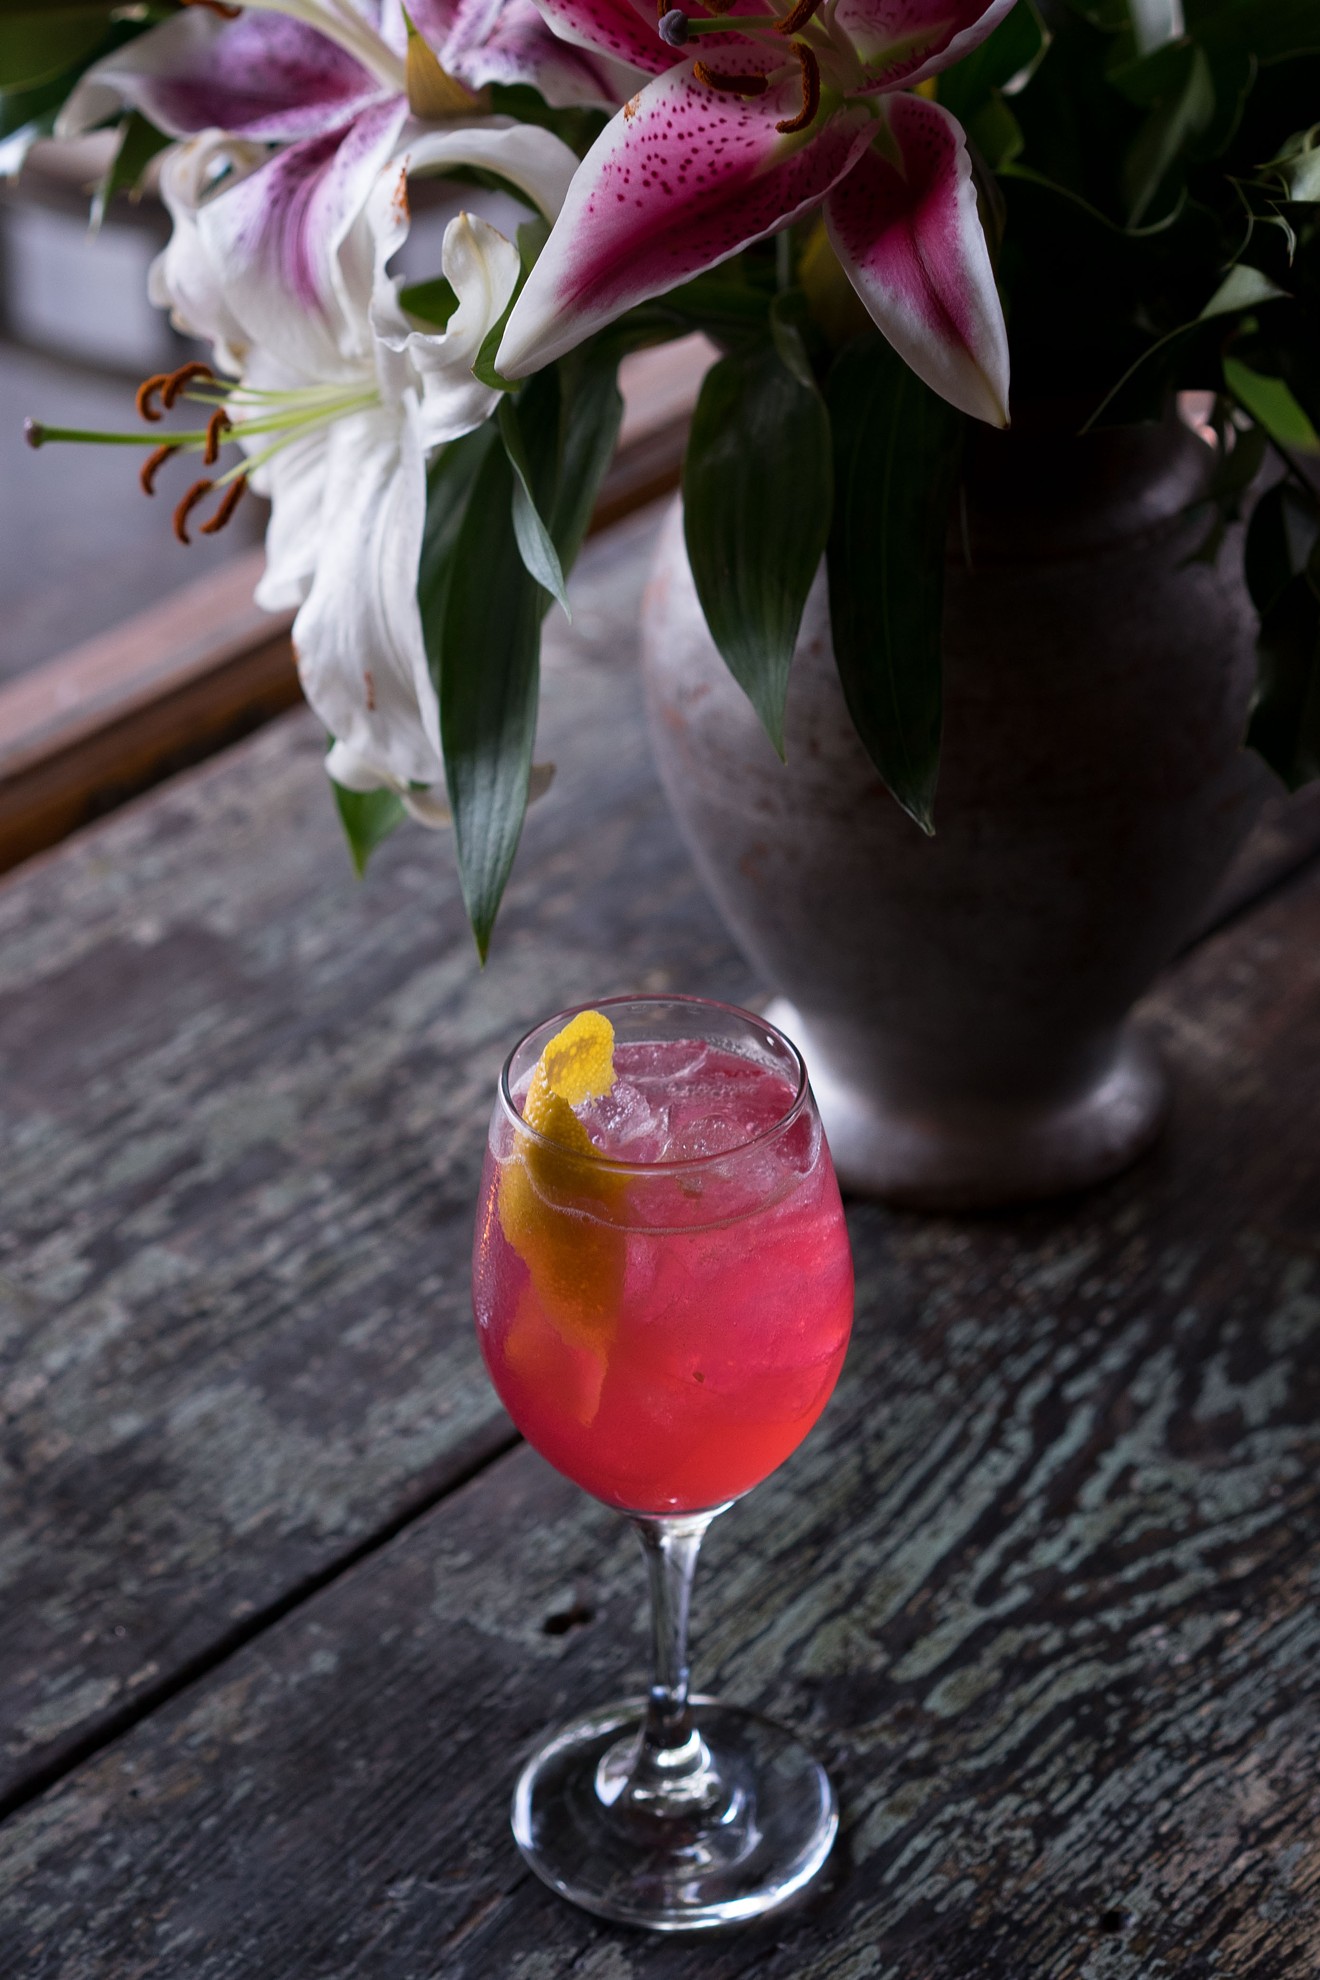 The Andie Walsh cocktail, built with house-made hibiscus syrup, is named for the Pretty In Pink character played by Molly Ringwald.